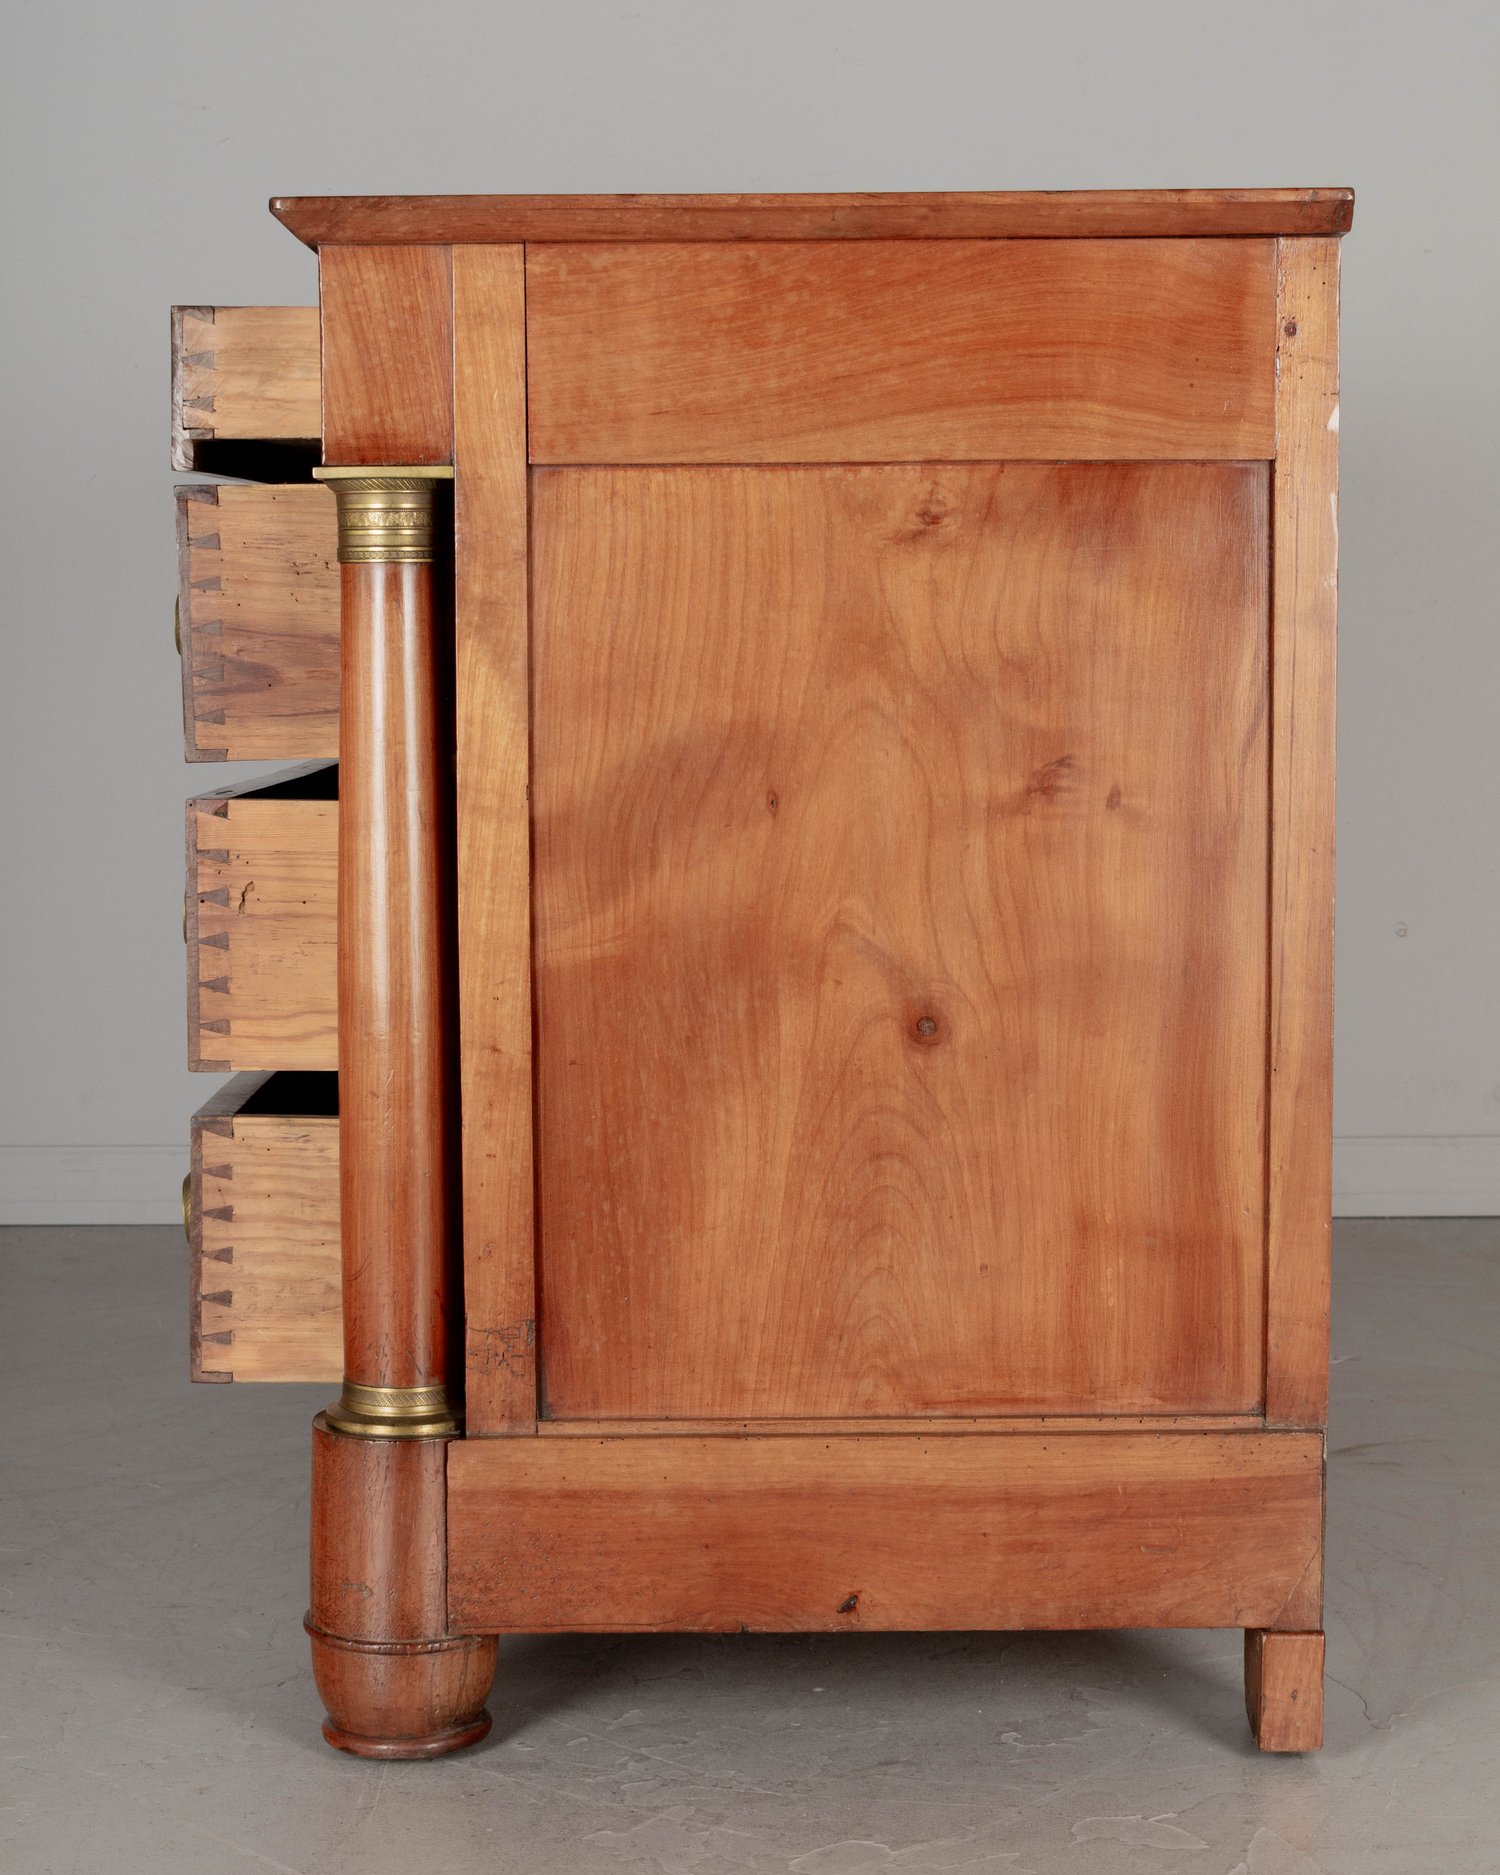 Antique Furniture Buyers - Sideboards, Chests, Rosewood, Antique tables